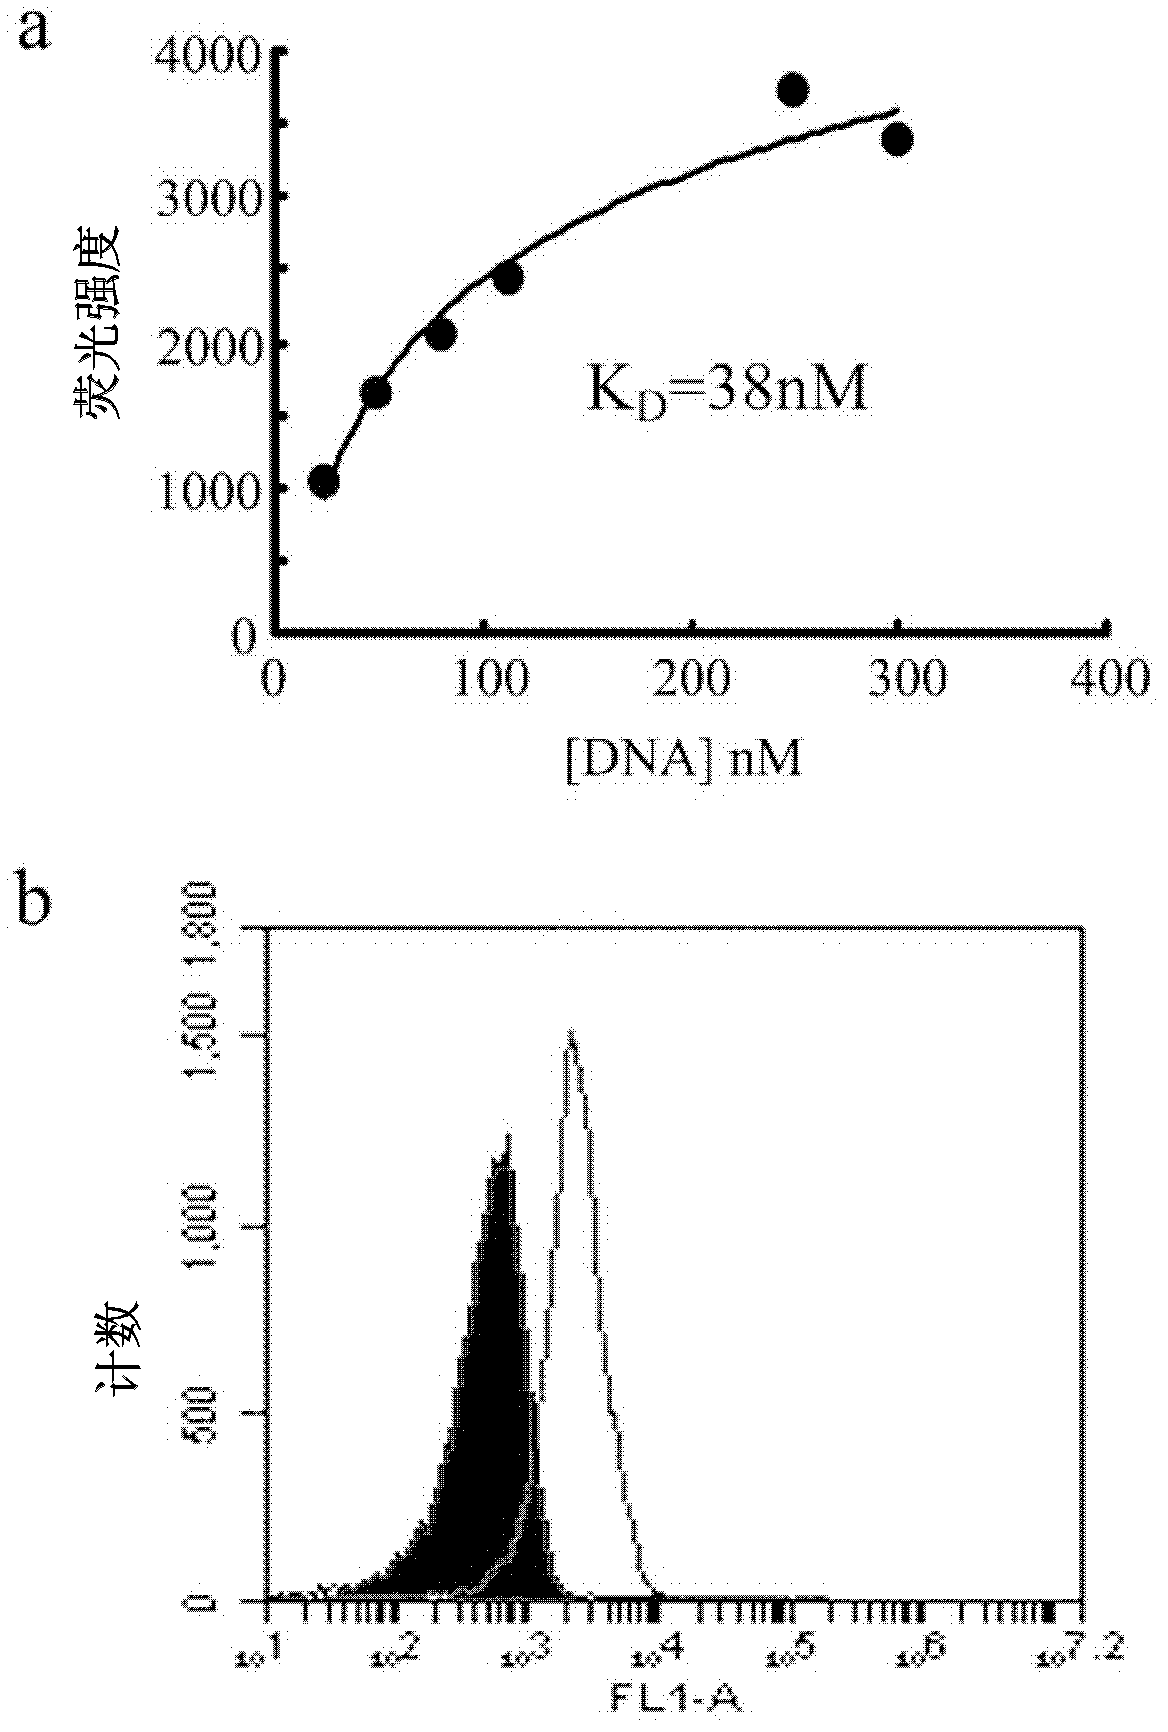 MUC1 protein nucleic acid aptamer, complex, composition and purposes thereof